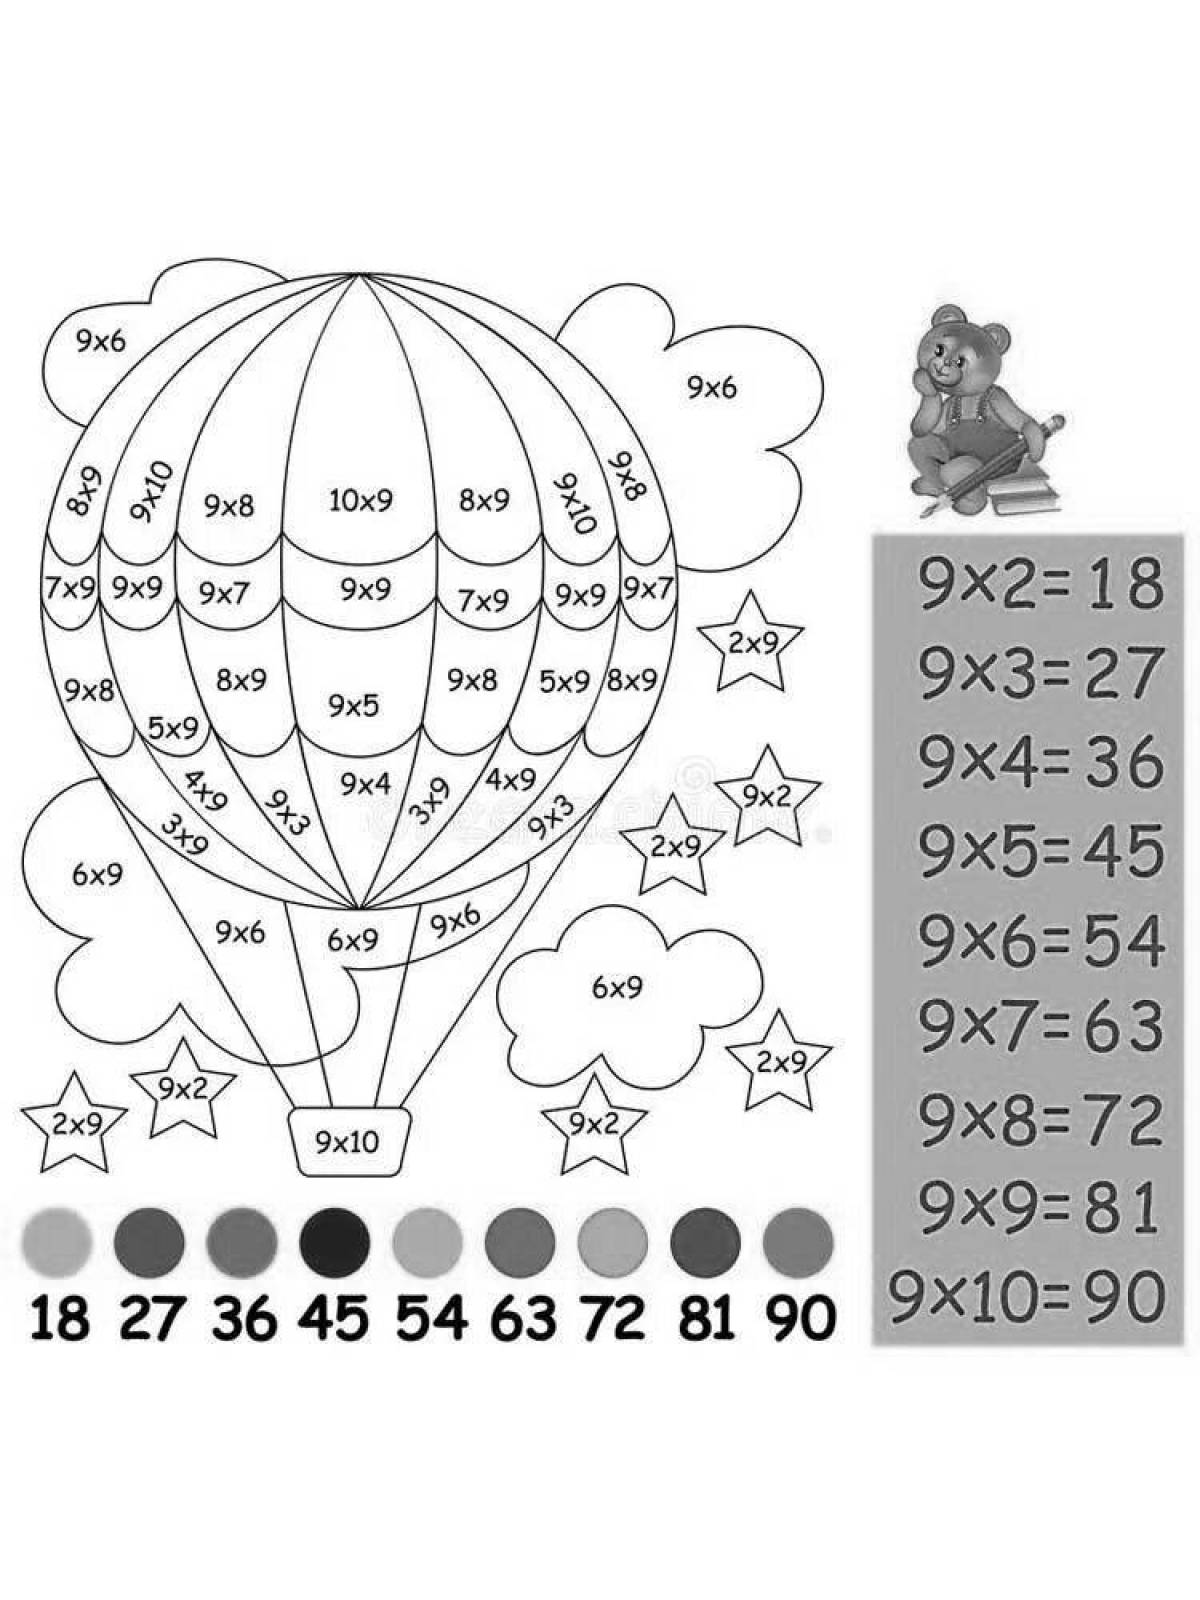 Colorful coloring page 3x multiplication table